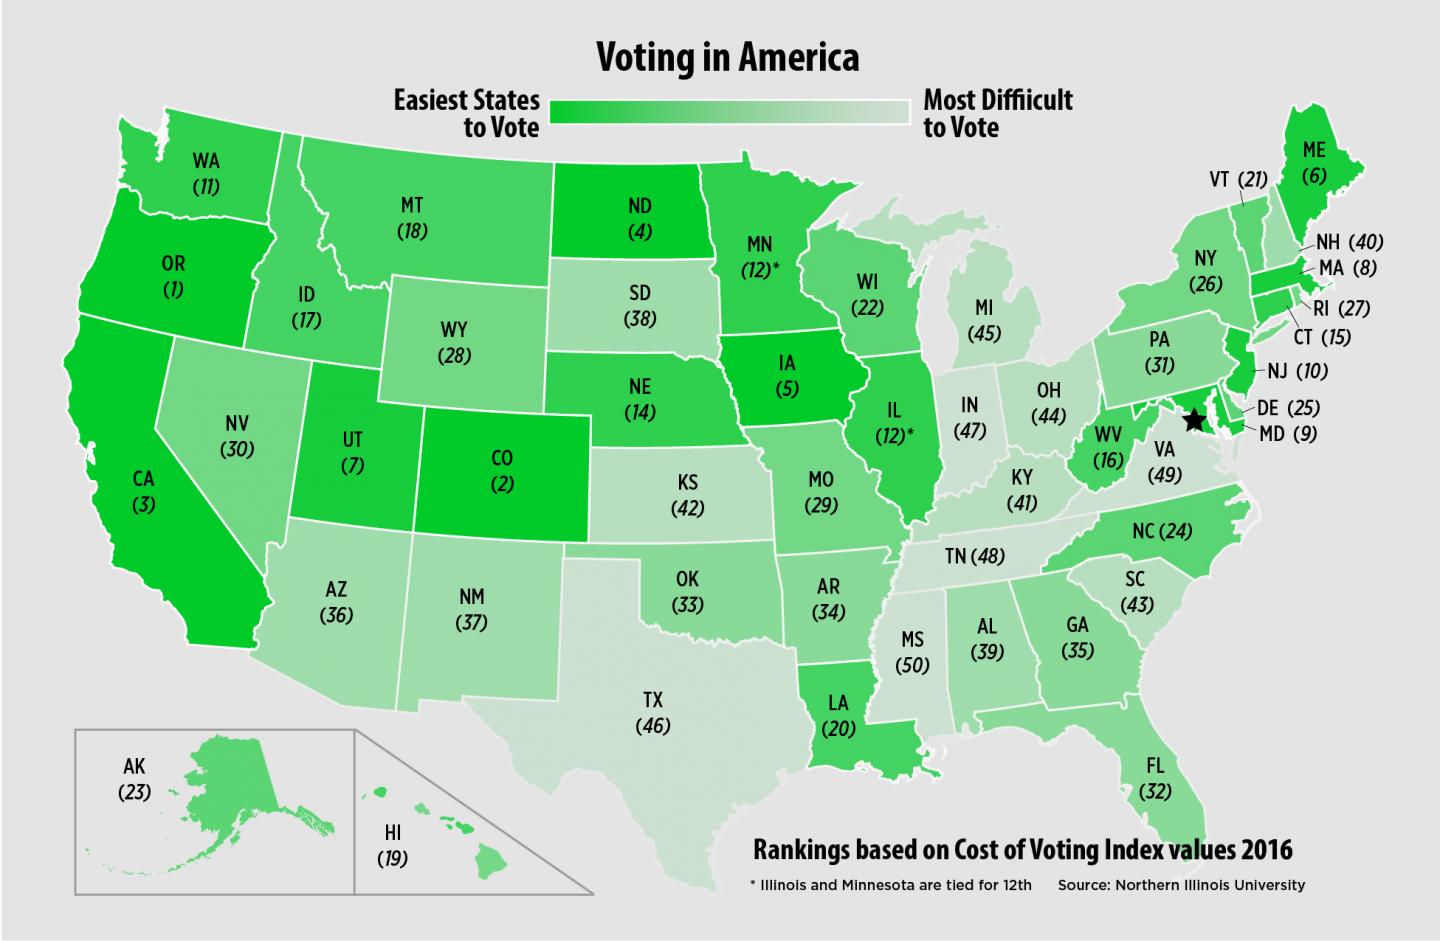 Ease-of-Vote Rank